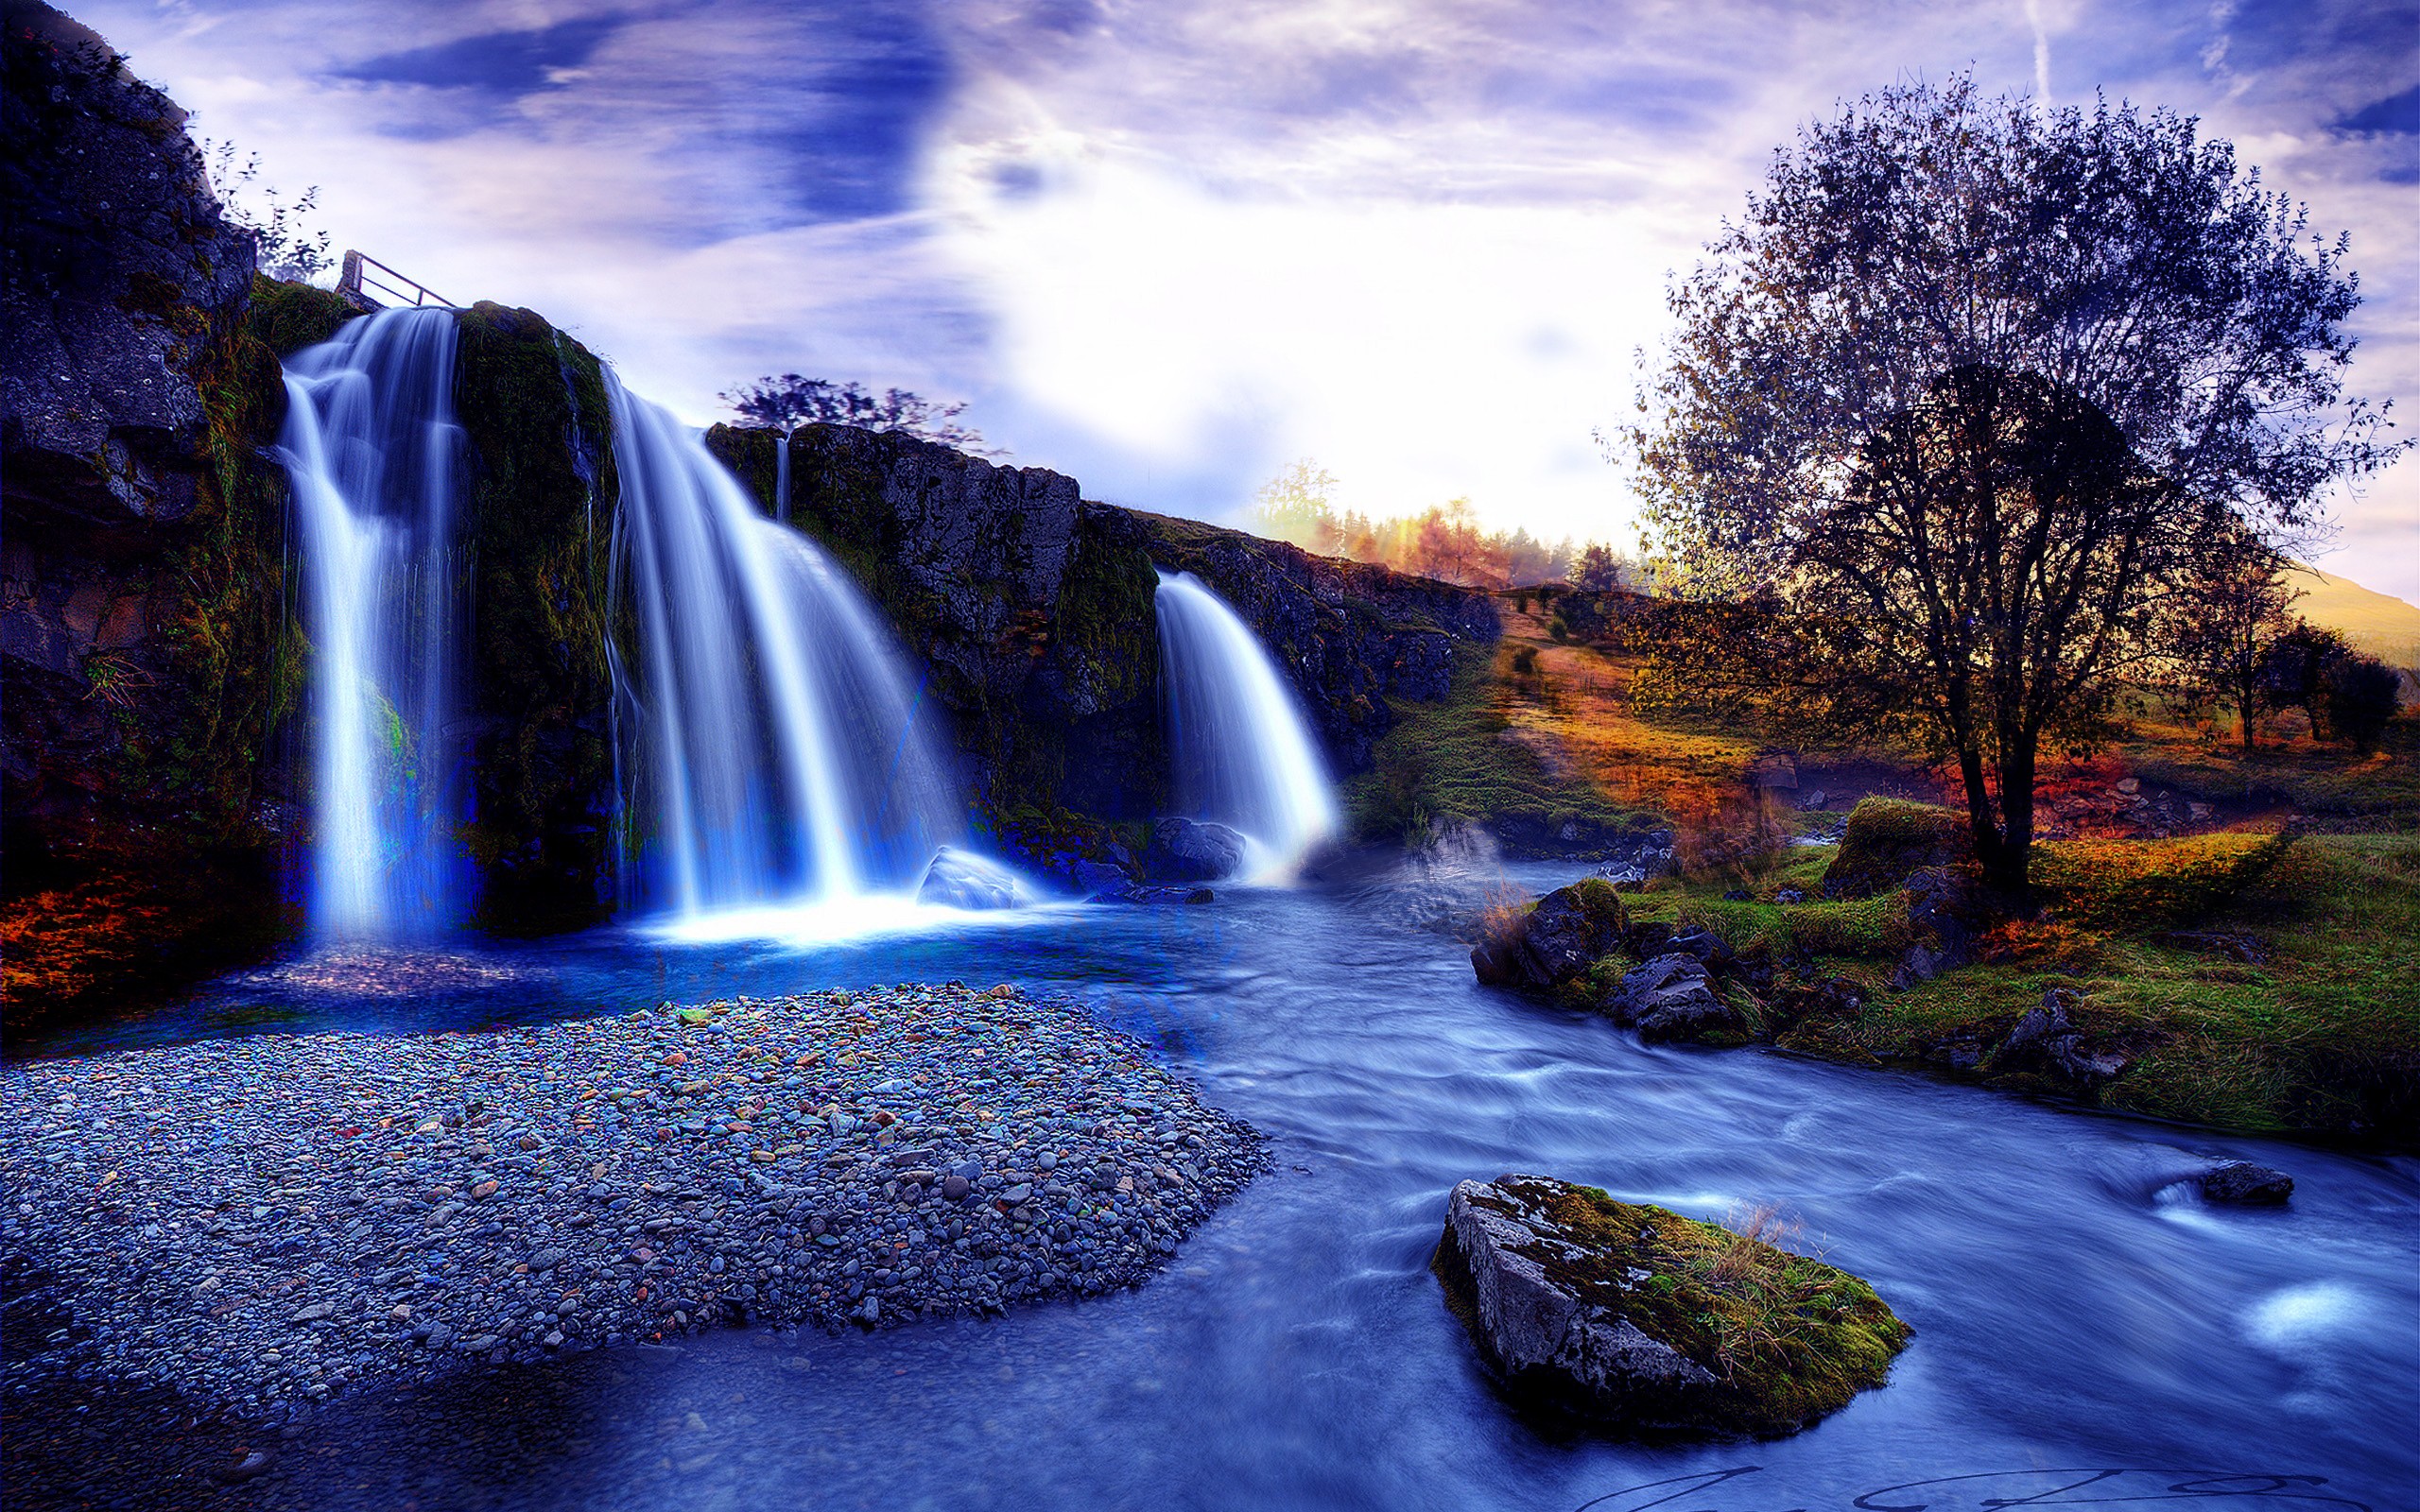 General 2560x1600 landscape nature waterfall outdoors water trees